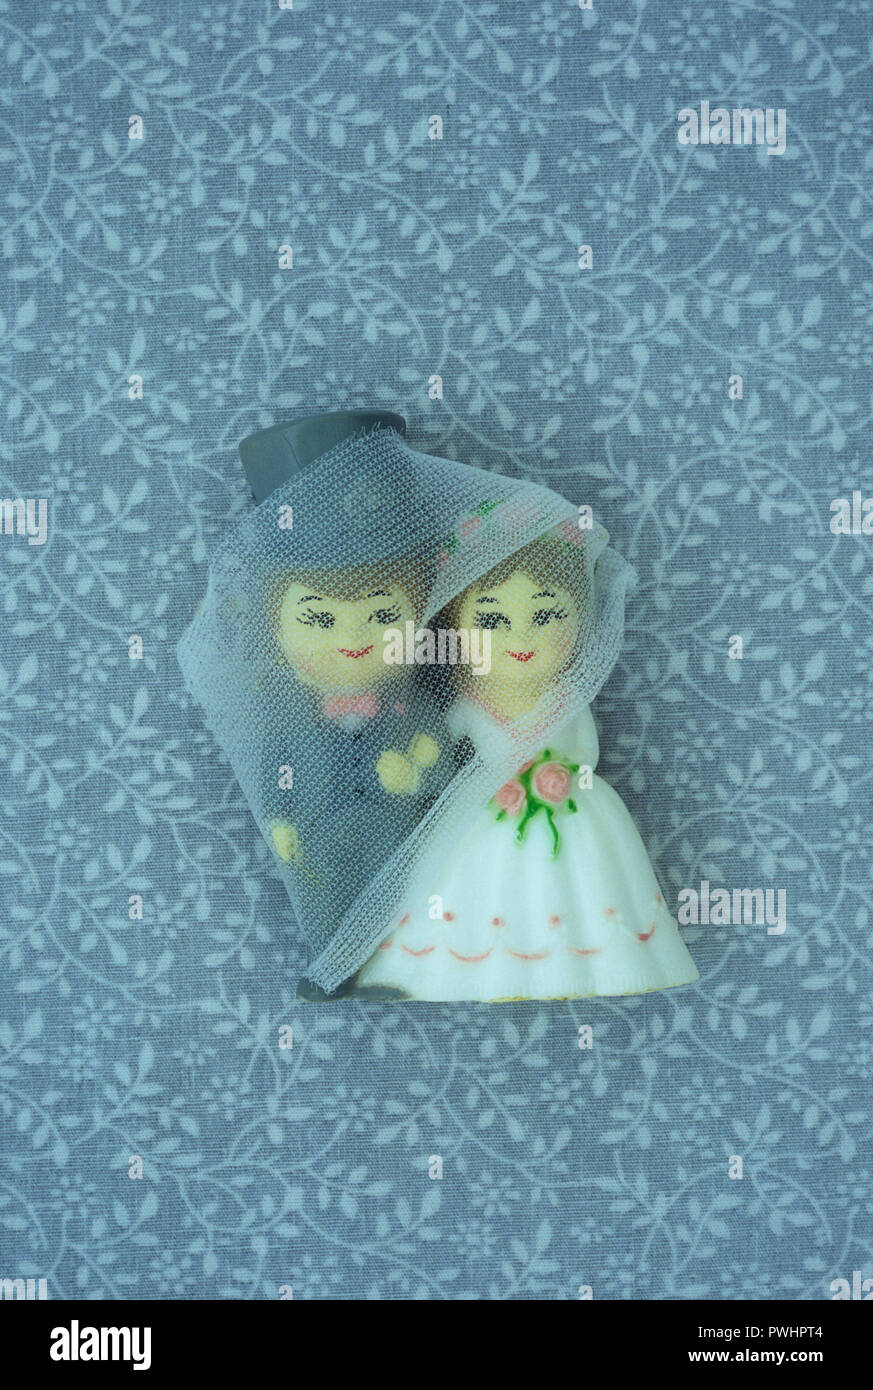 Model of cute wedding couple standing in front of simple floral wall covering Stock Photo